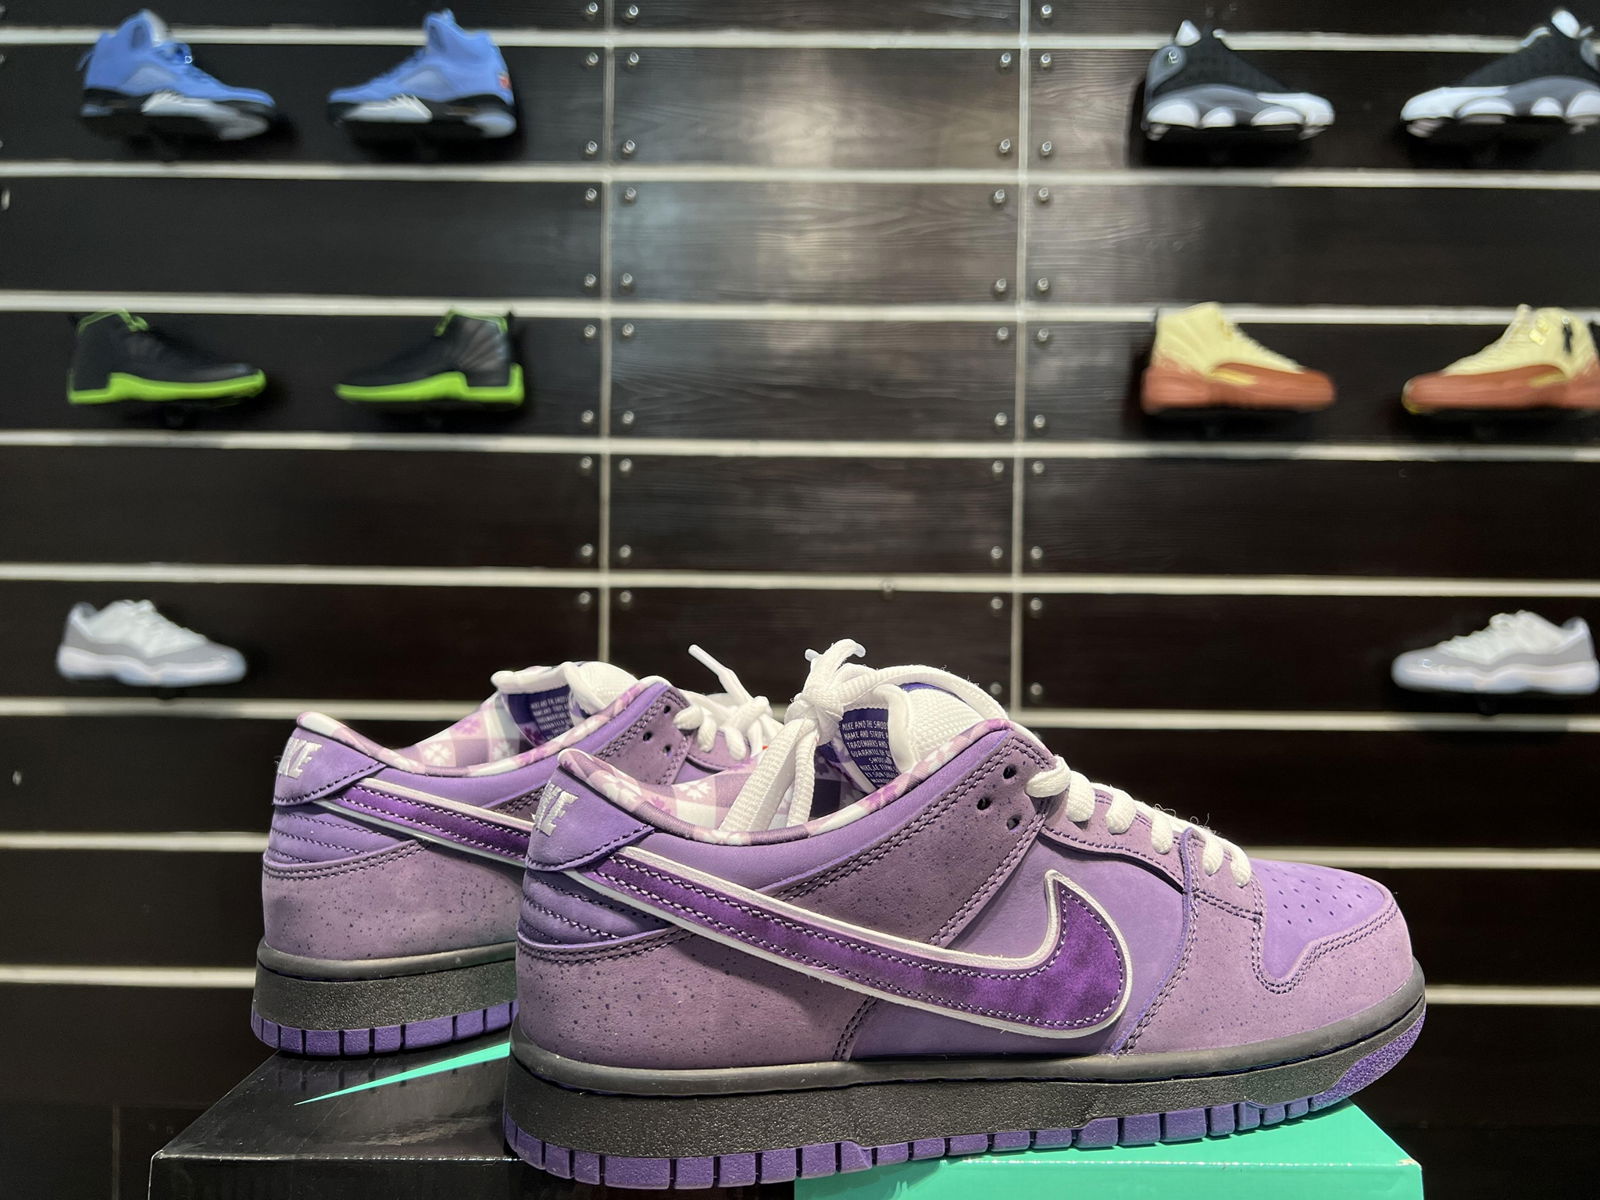 Concepts X      SB Dunk ''Purple Lobster "Recreational sports skateboard shoes 2